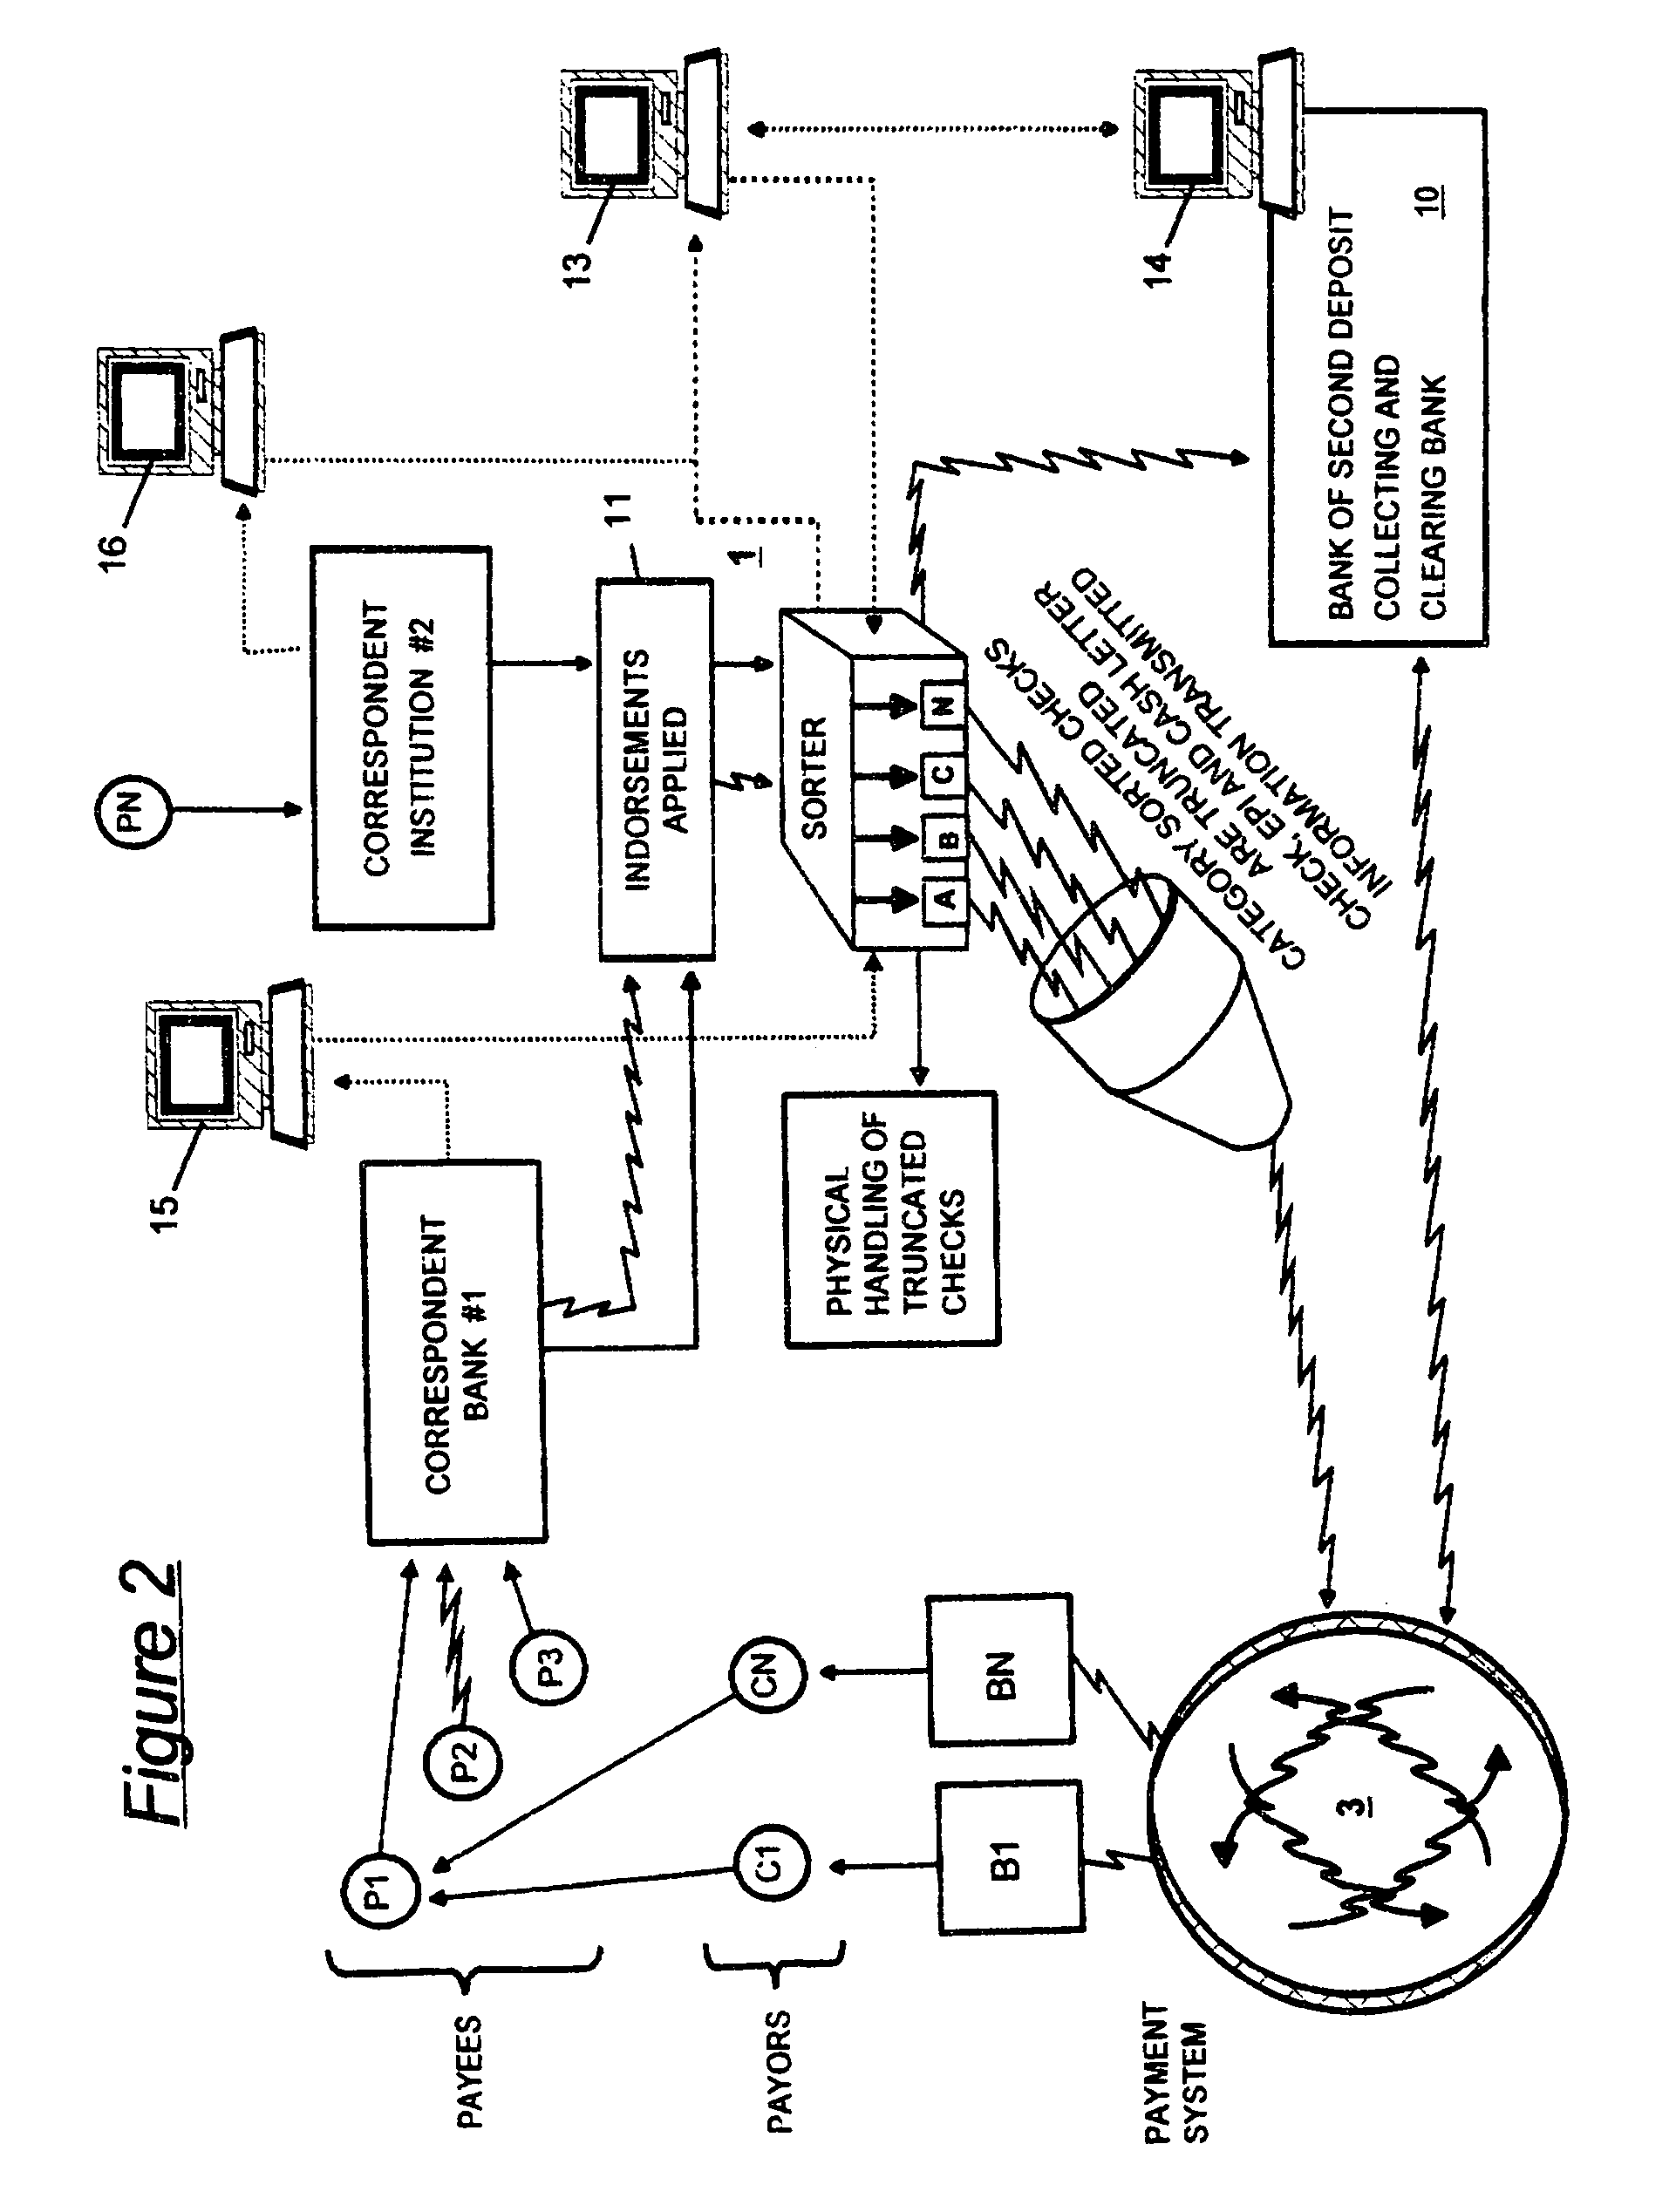 System for effecting the payment of paper and electronic financial instruments received at a payment facility